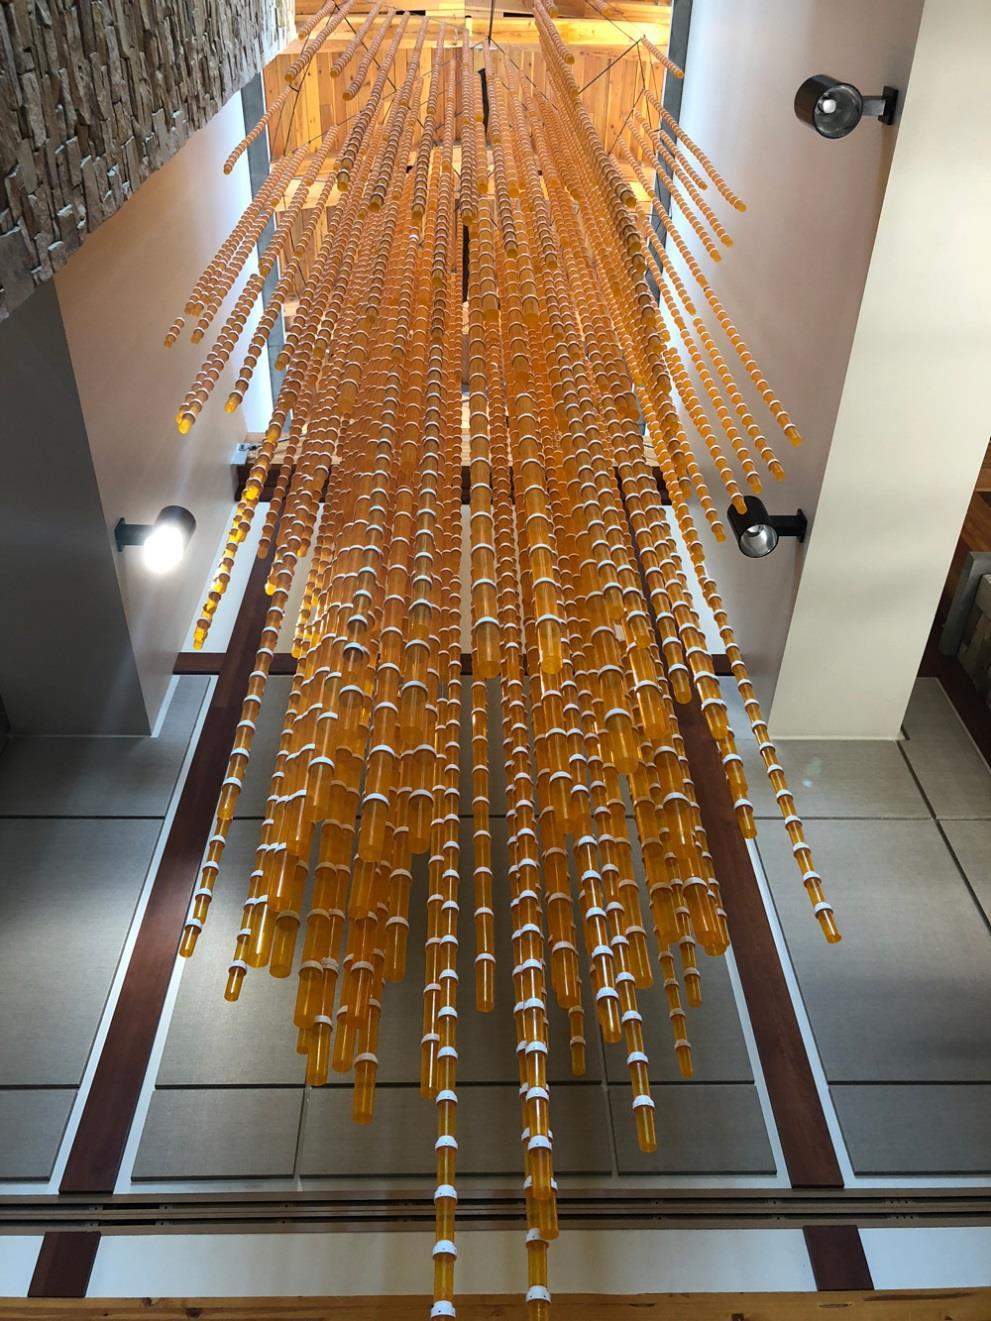 Use Only As Directed Push Pill bottle chandelier: The chandelier has been displayed in several hospitals.